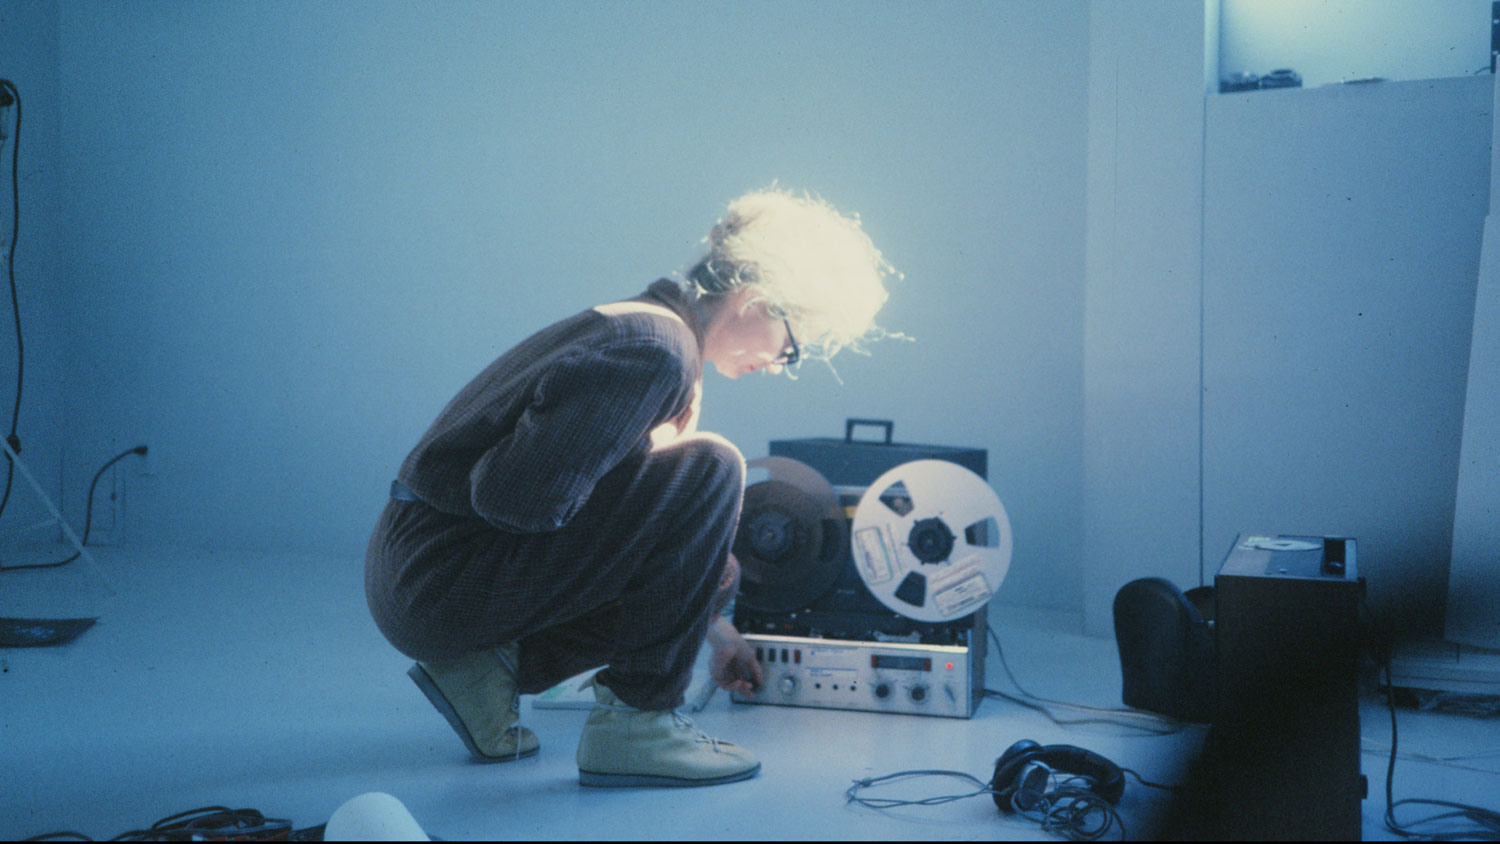 Maryanne Amacher kneeling in front of a 70's film projector in a cooly lit room.  